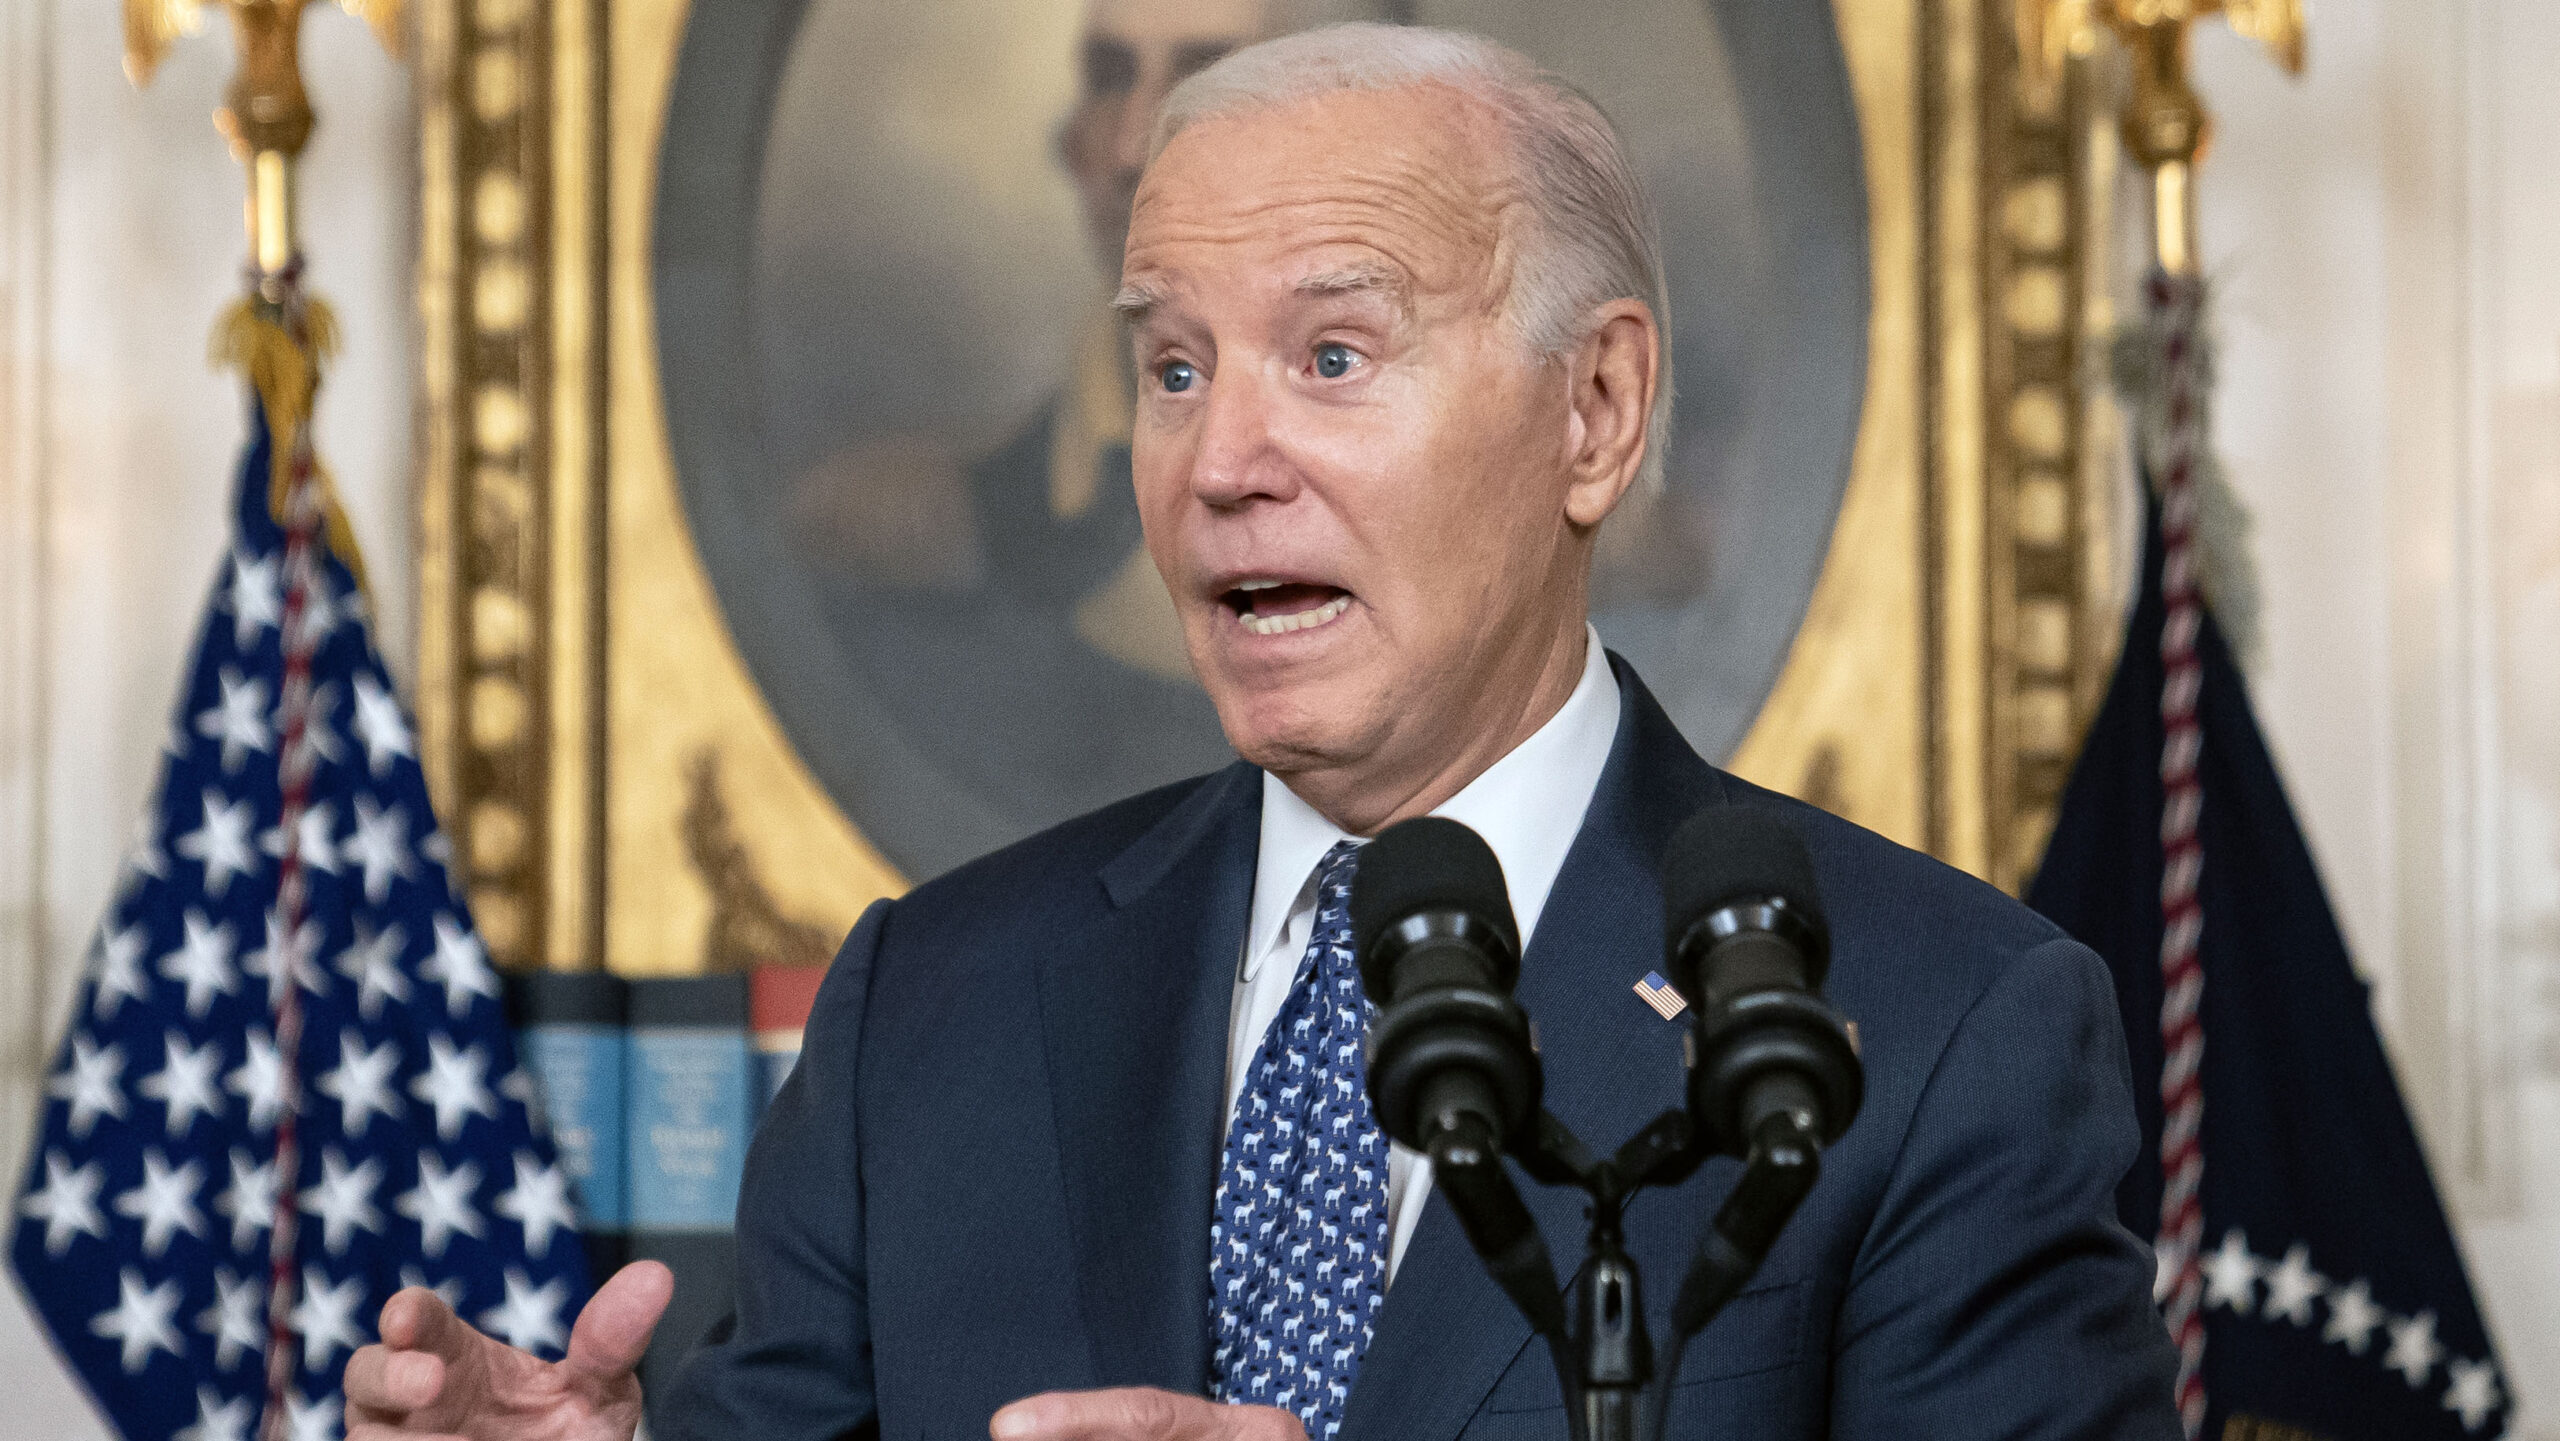 Democrats Panic After Biden’s Disastrous Press Conference: ‘Worse Than An Indictment’